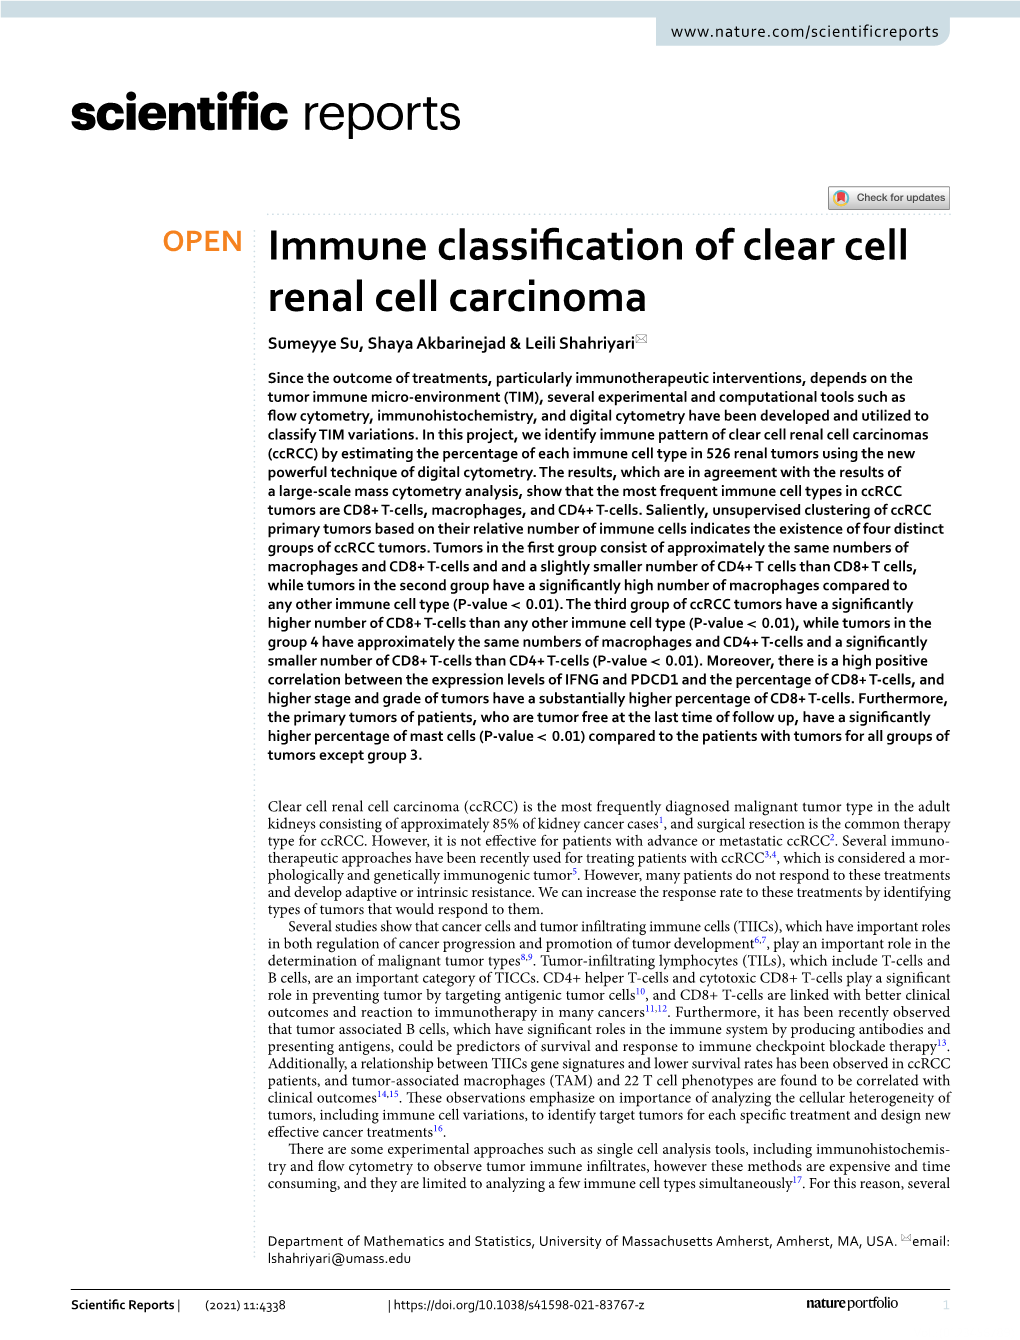 Immune Classification of Clear Cell Renal Cell Carcinoma